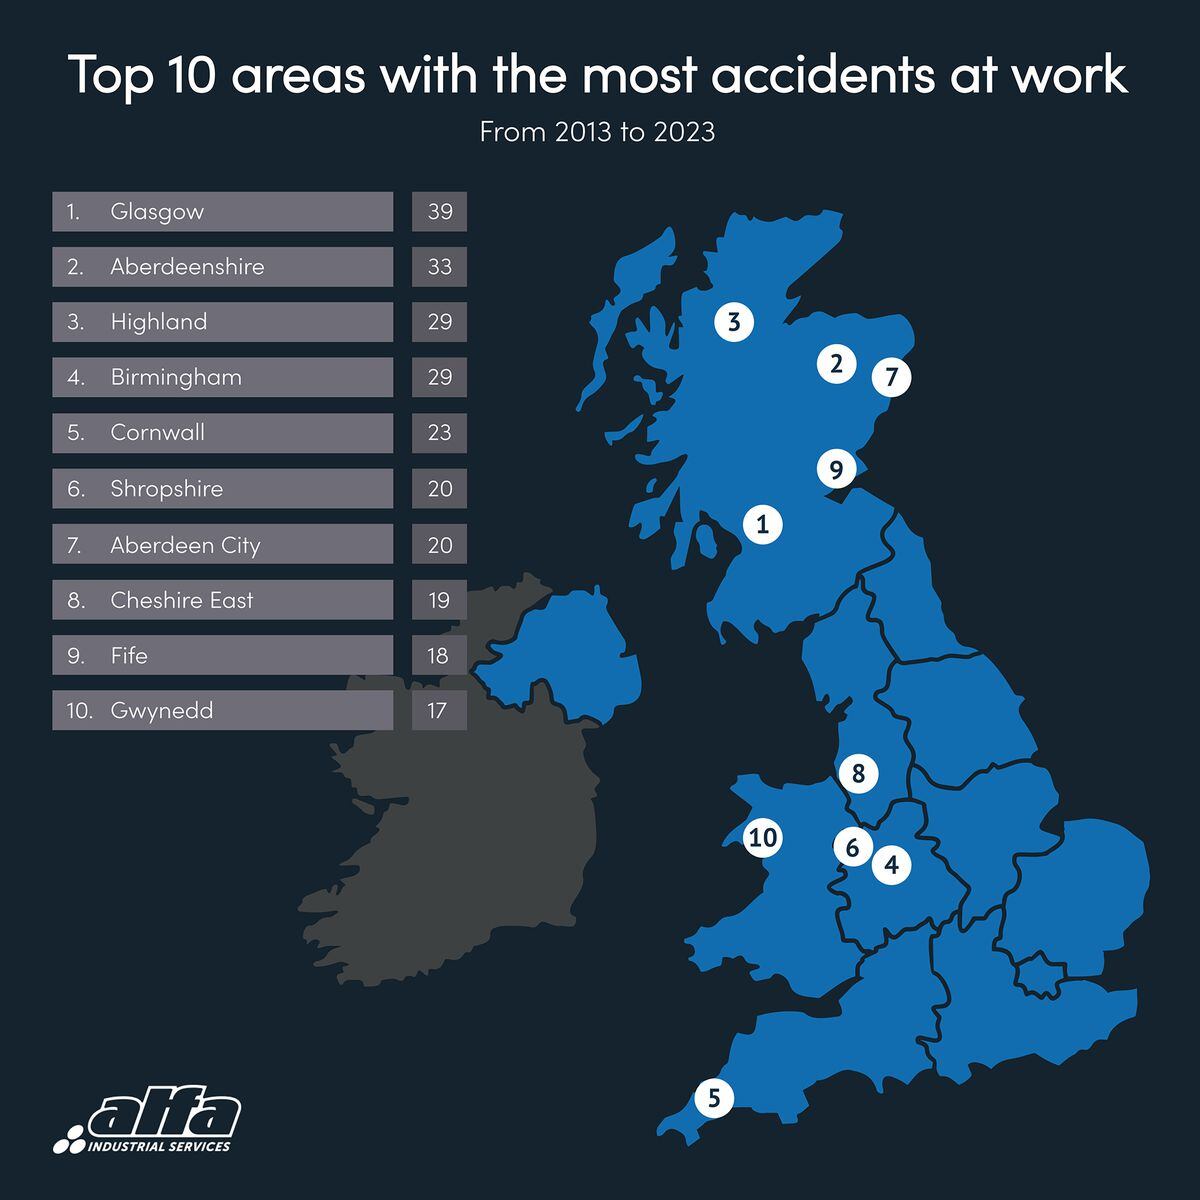 The top 10 areas in the UK with the most accidents at work